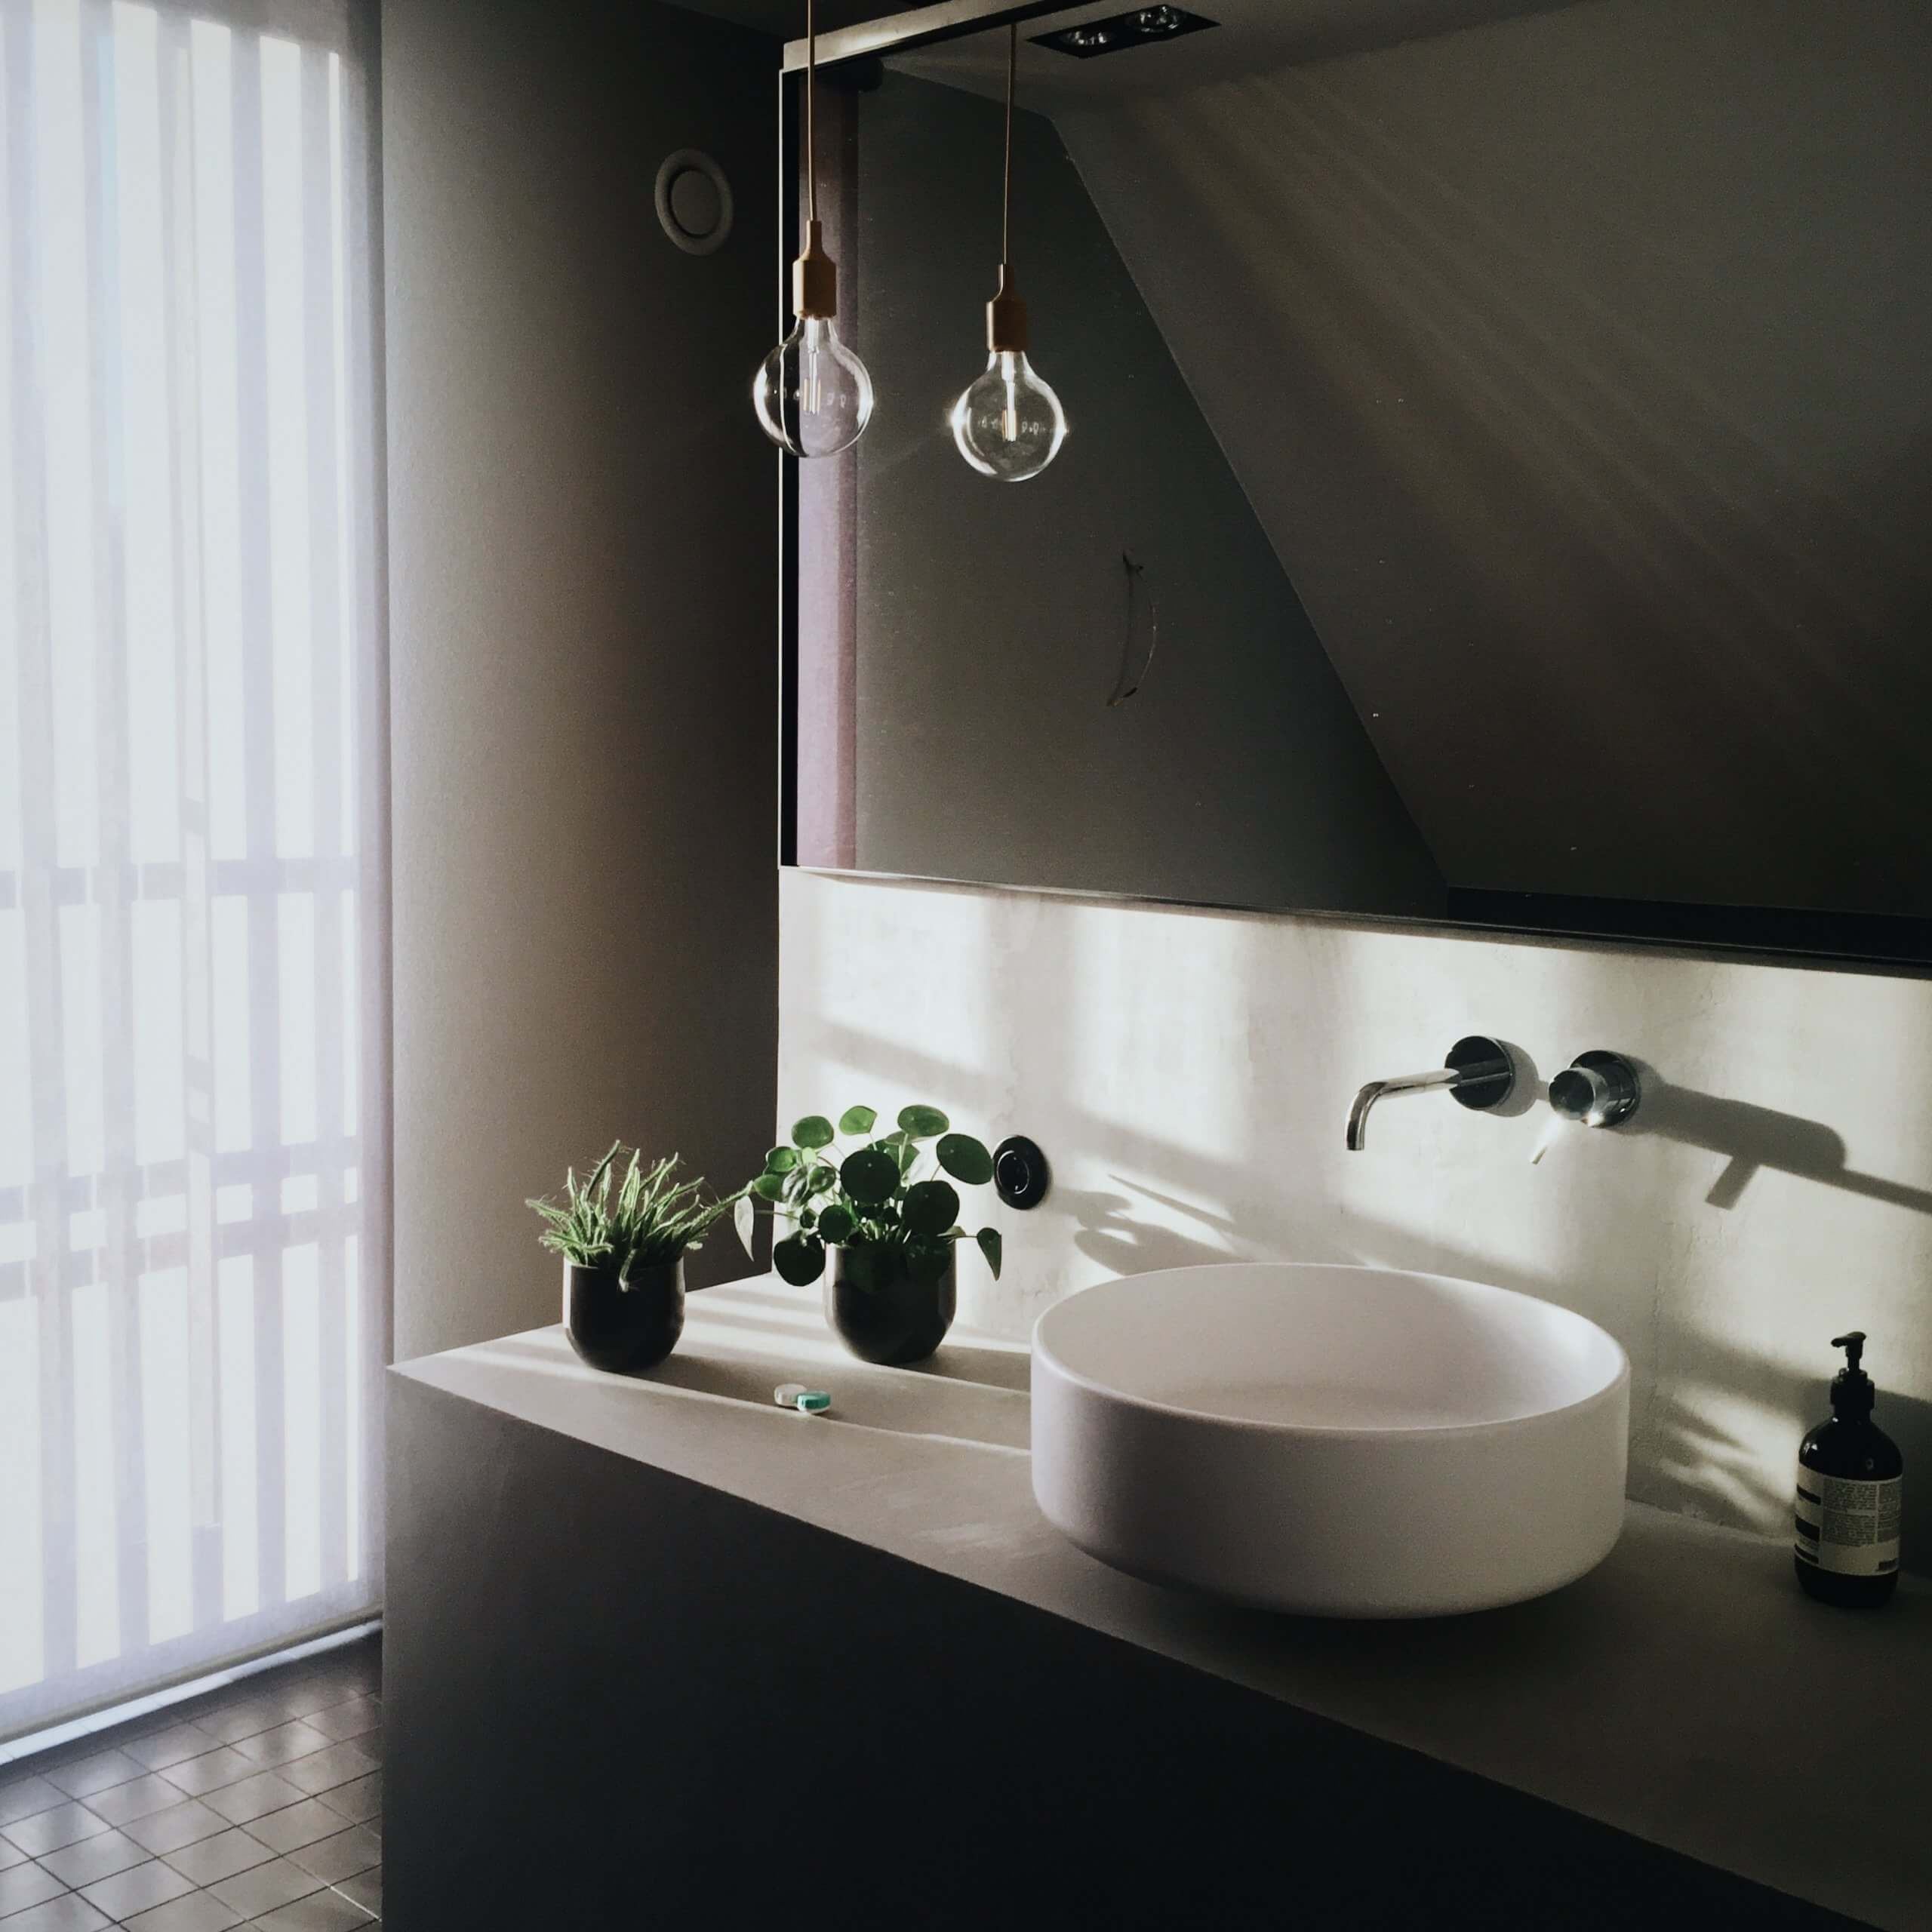 Natural lighting is the best lighting when it comes to bathrooms.